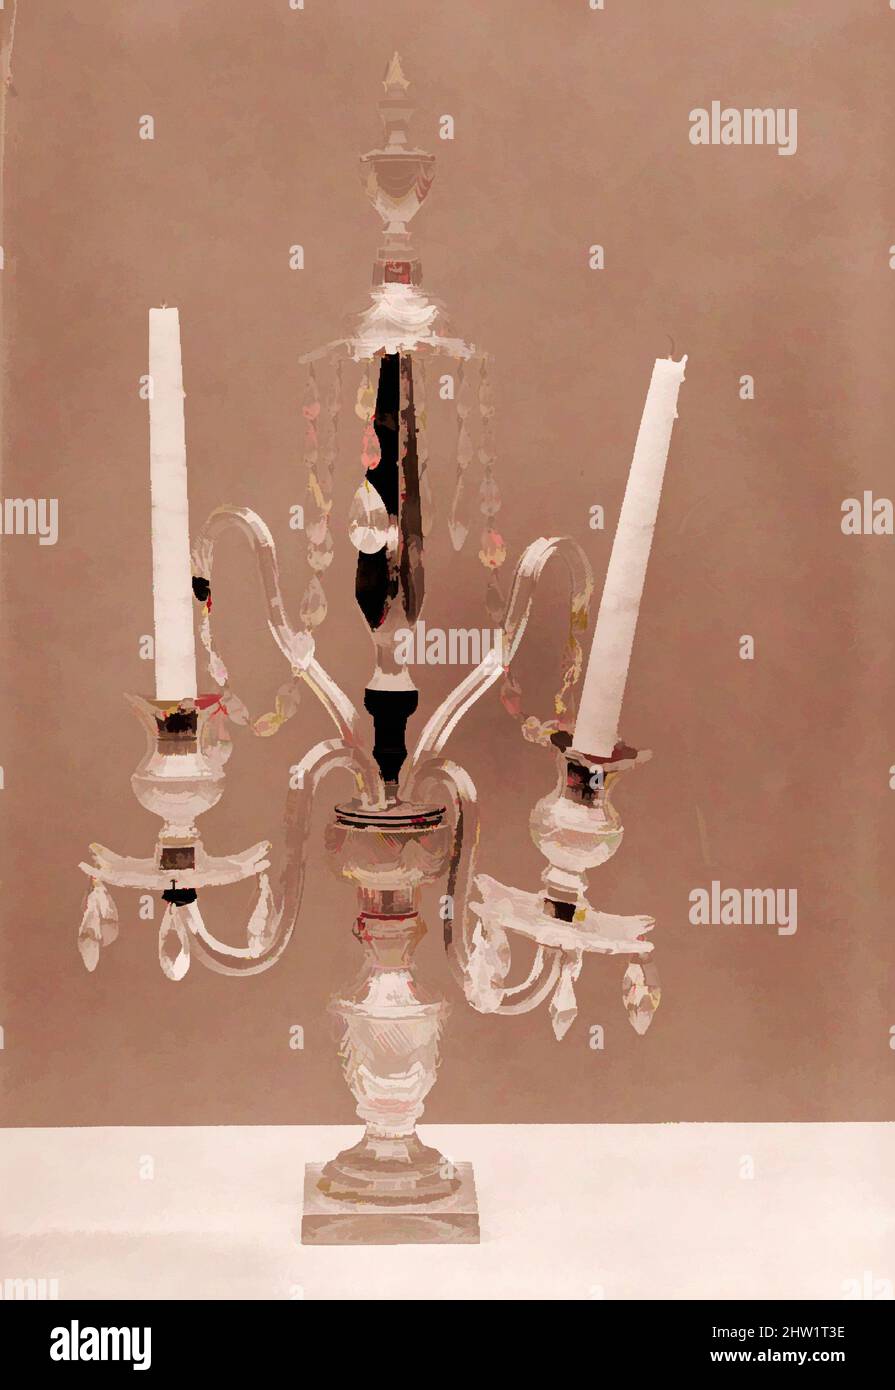 Art inspired by Candelabrum, ca. 1785, Made in England, British, Cut blown glass, H. 26 1/2 in. (67.3 cm), Glass, Classic works modernized by Artotop with a splash of modernity. Shapes, color and value, eye-catching visual impact on art. Emotions through freedom of artworks in a contemporary way. A timeless message pursuing a wildly creative new direction. Artists turning to the digital medium and creating the Artotop NFT Stock Photo